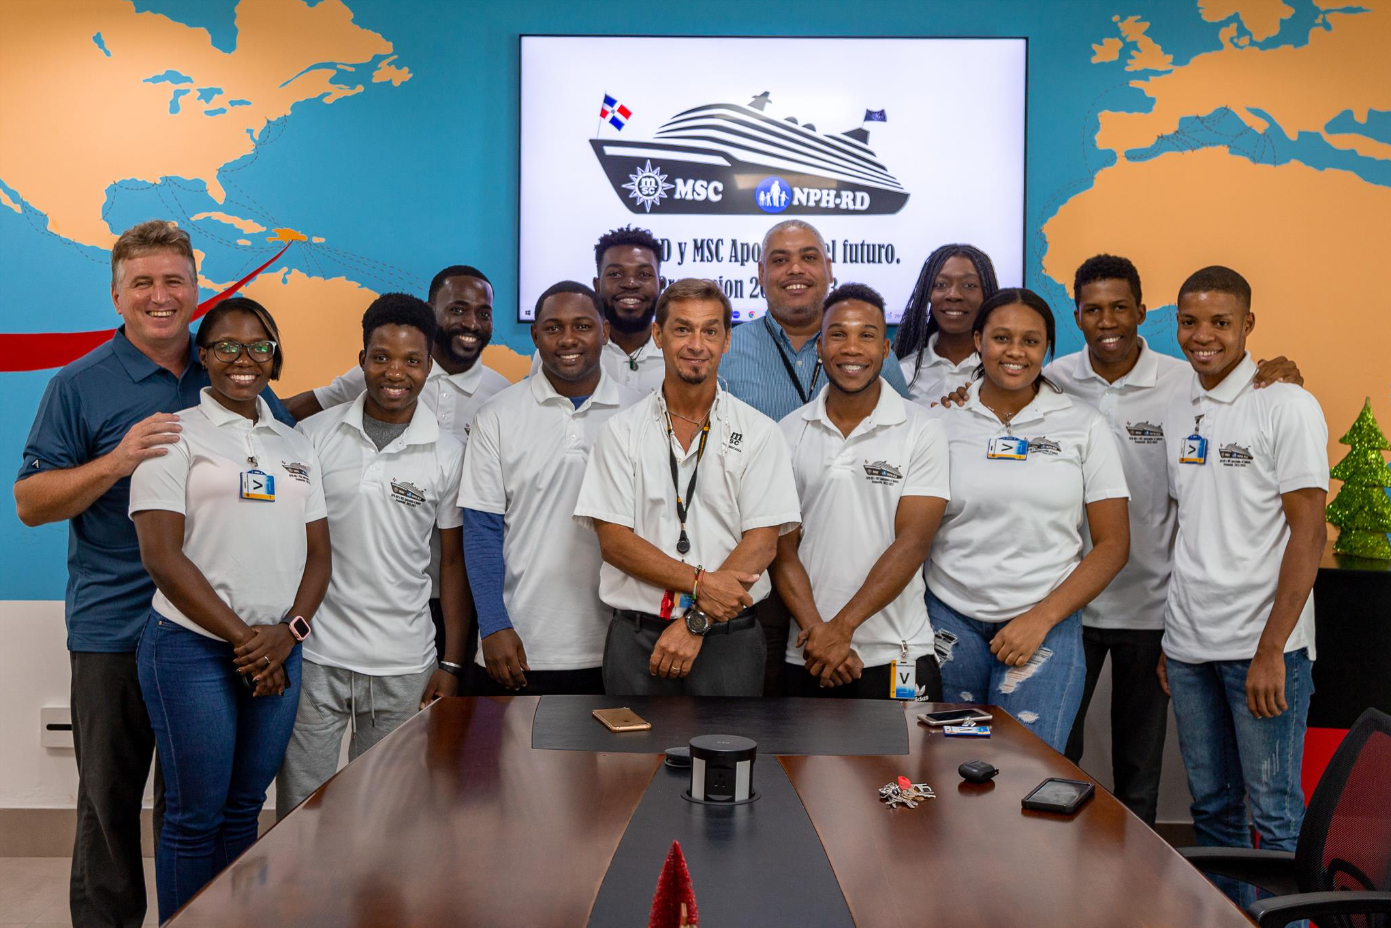 13 NPH Youths Find Employment with MSC Cruises